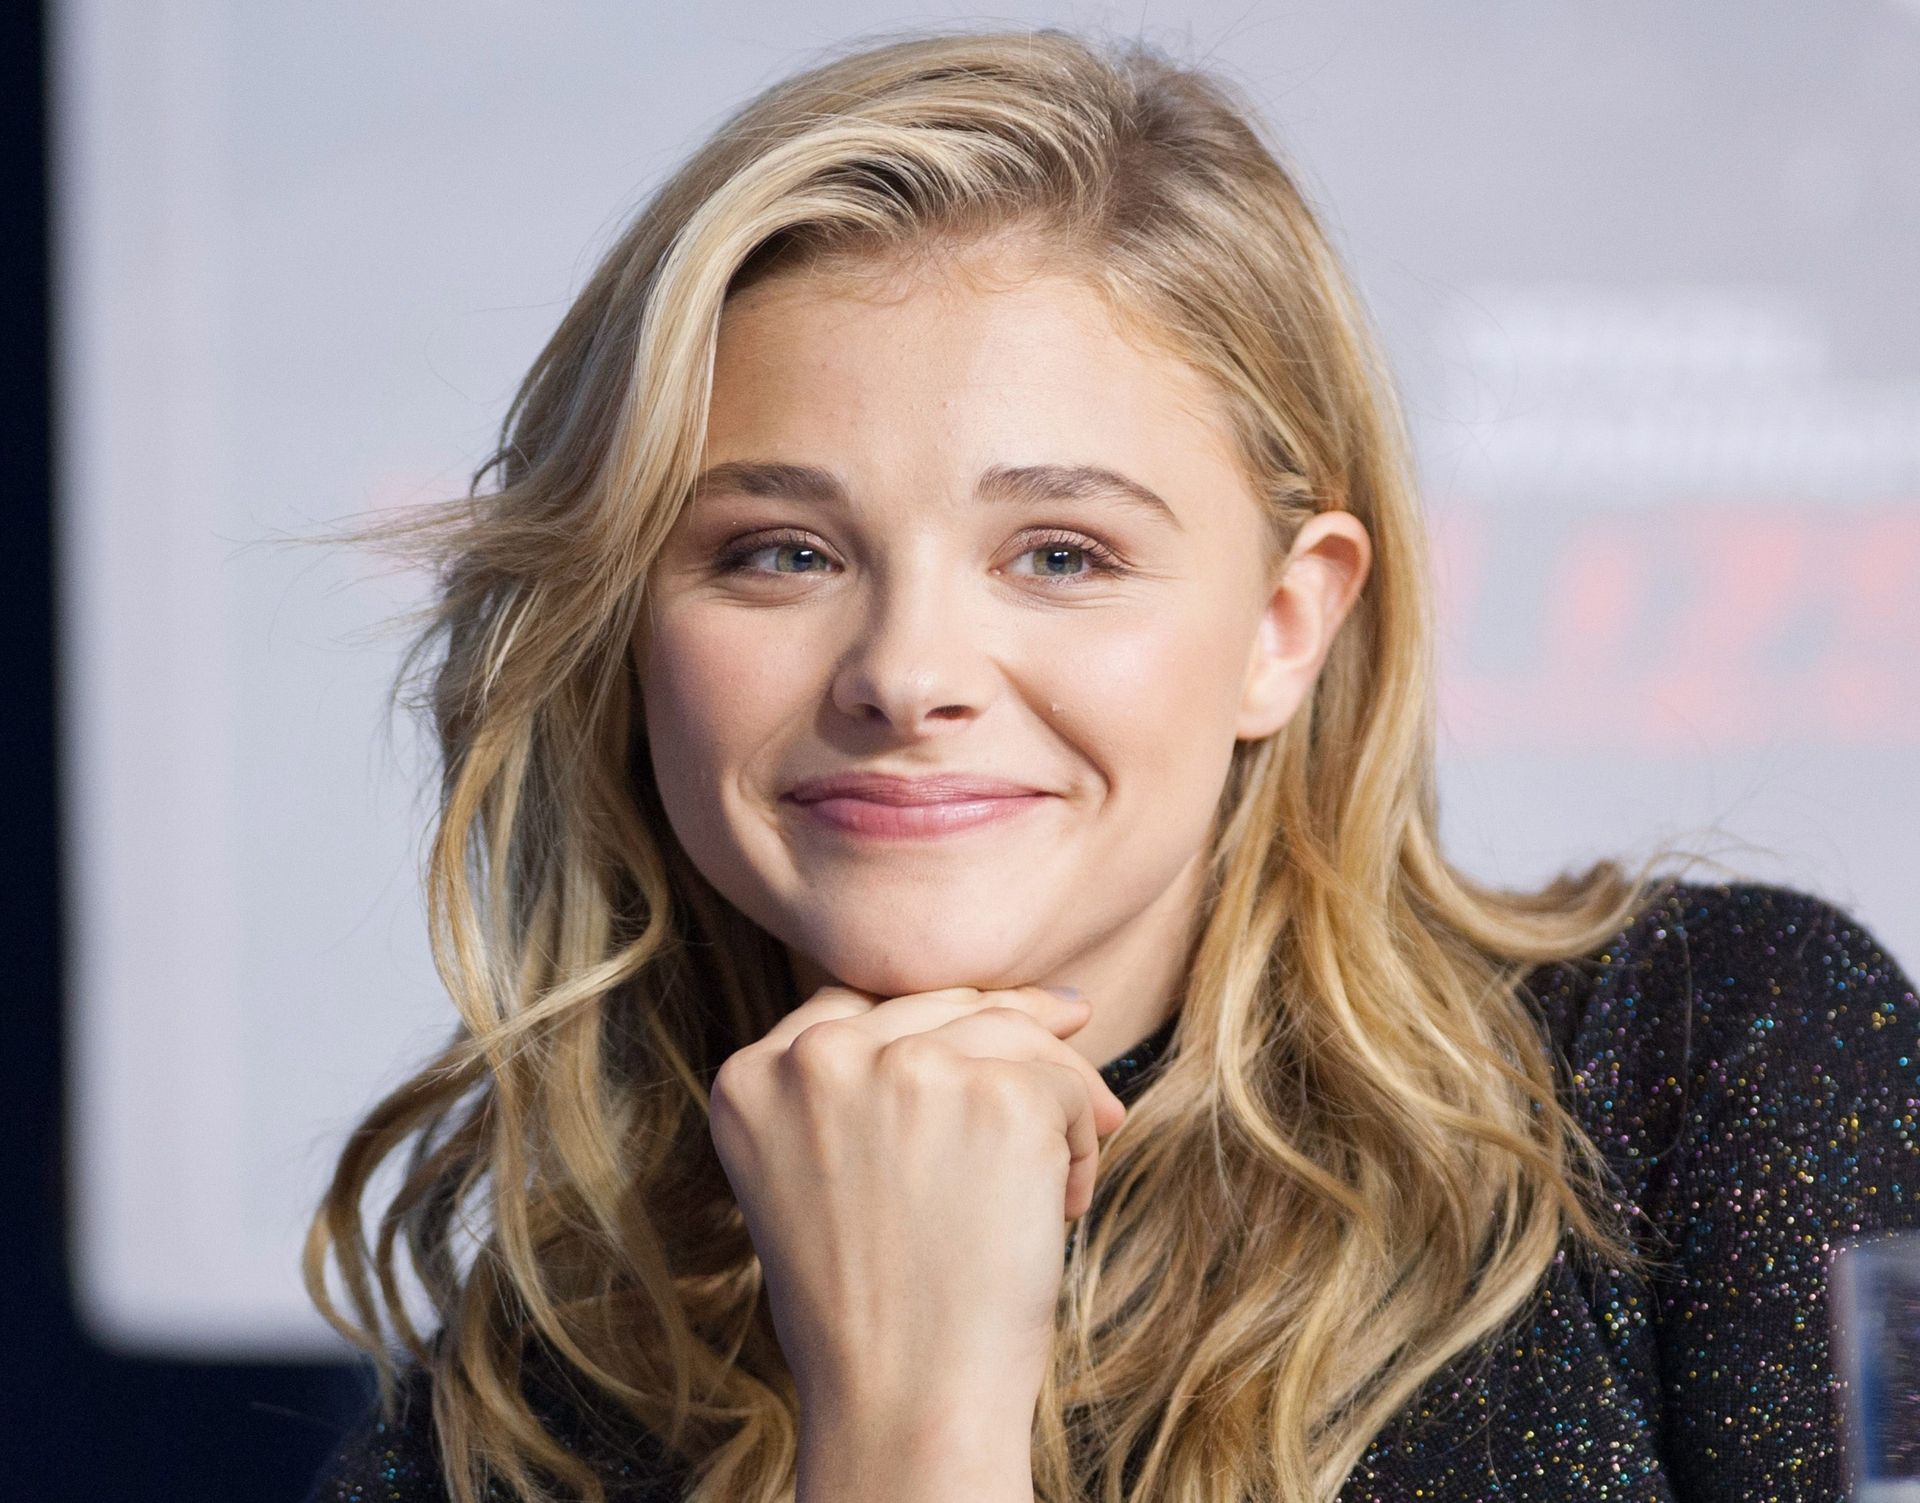 15-year-old Chloe Grace Moretz's 25-year-old co-star said she was